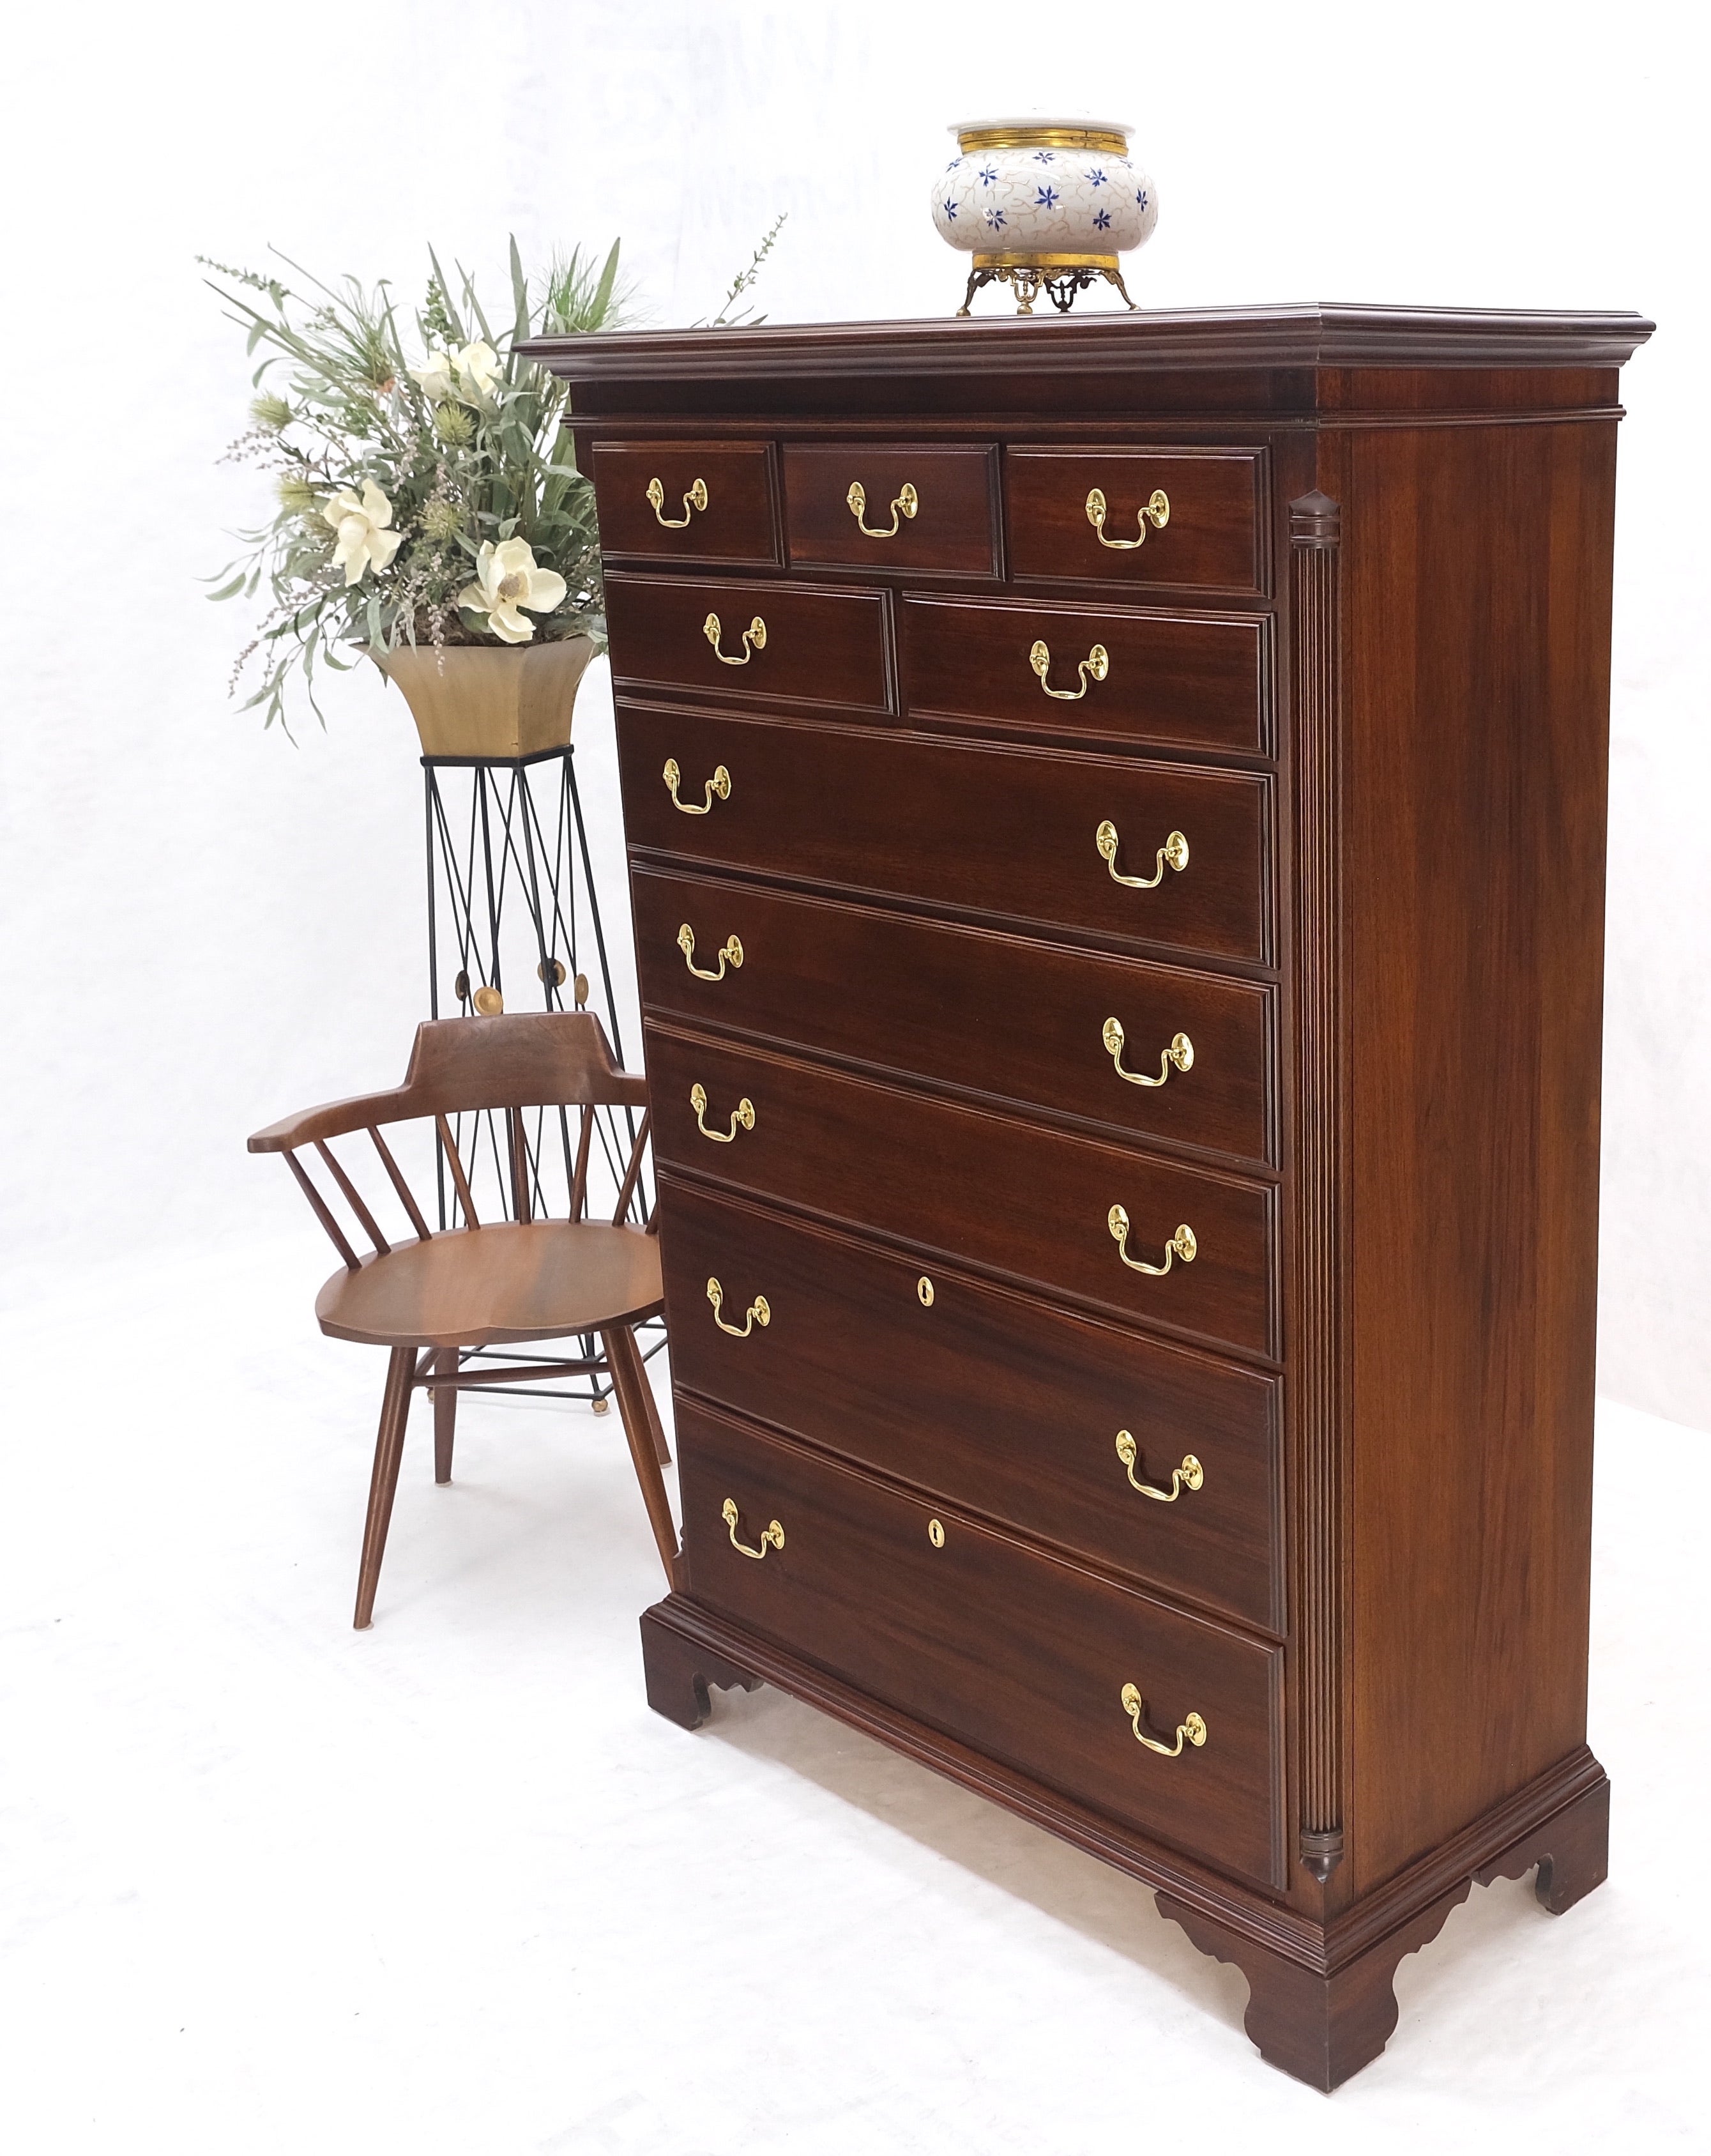 Solid Mahogany Brass Drop Pulls Federal High Boy Dresser Chest of Drawers MINT!.